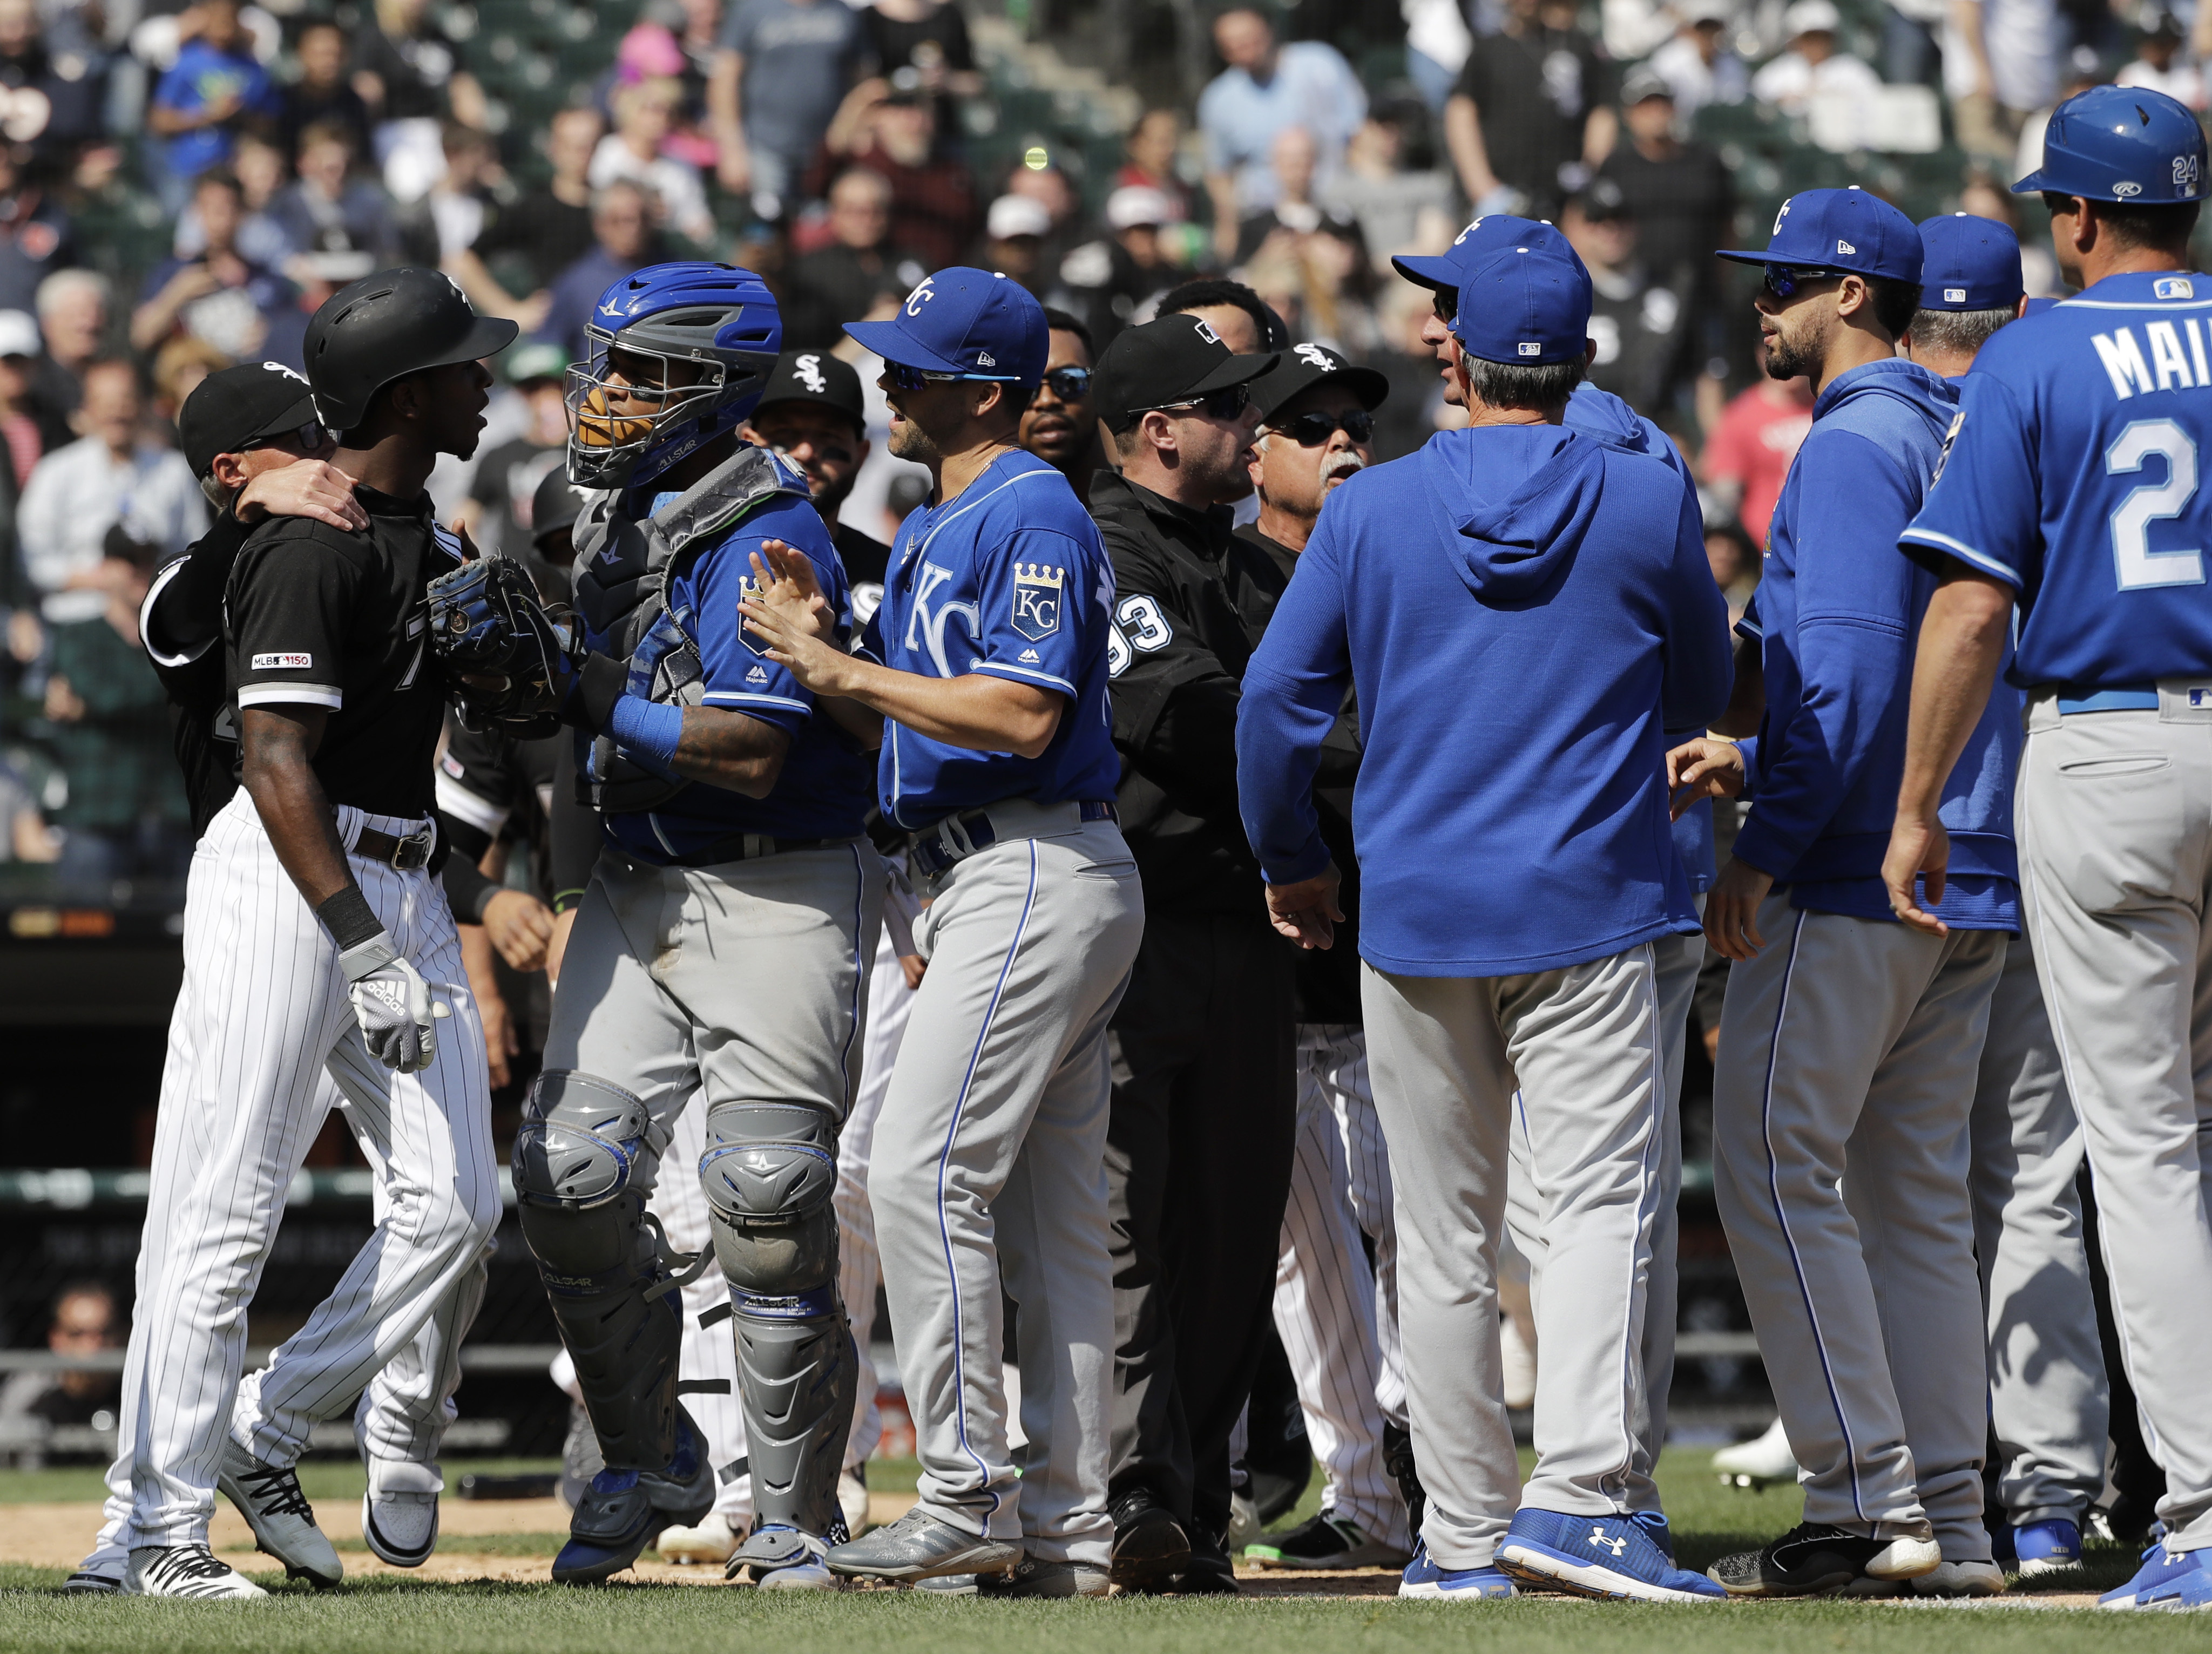 Royals hit Anderson after ChiSox SS flips bat; benches clear